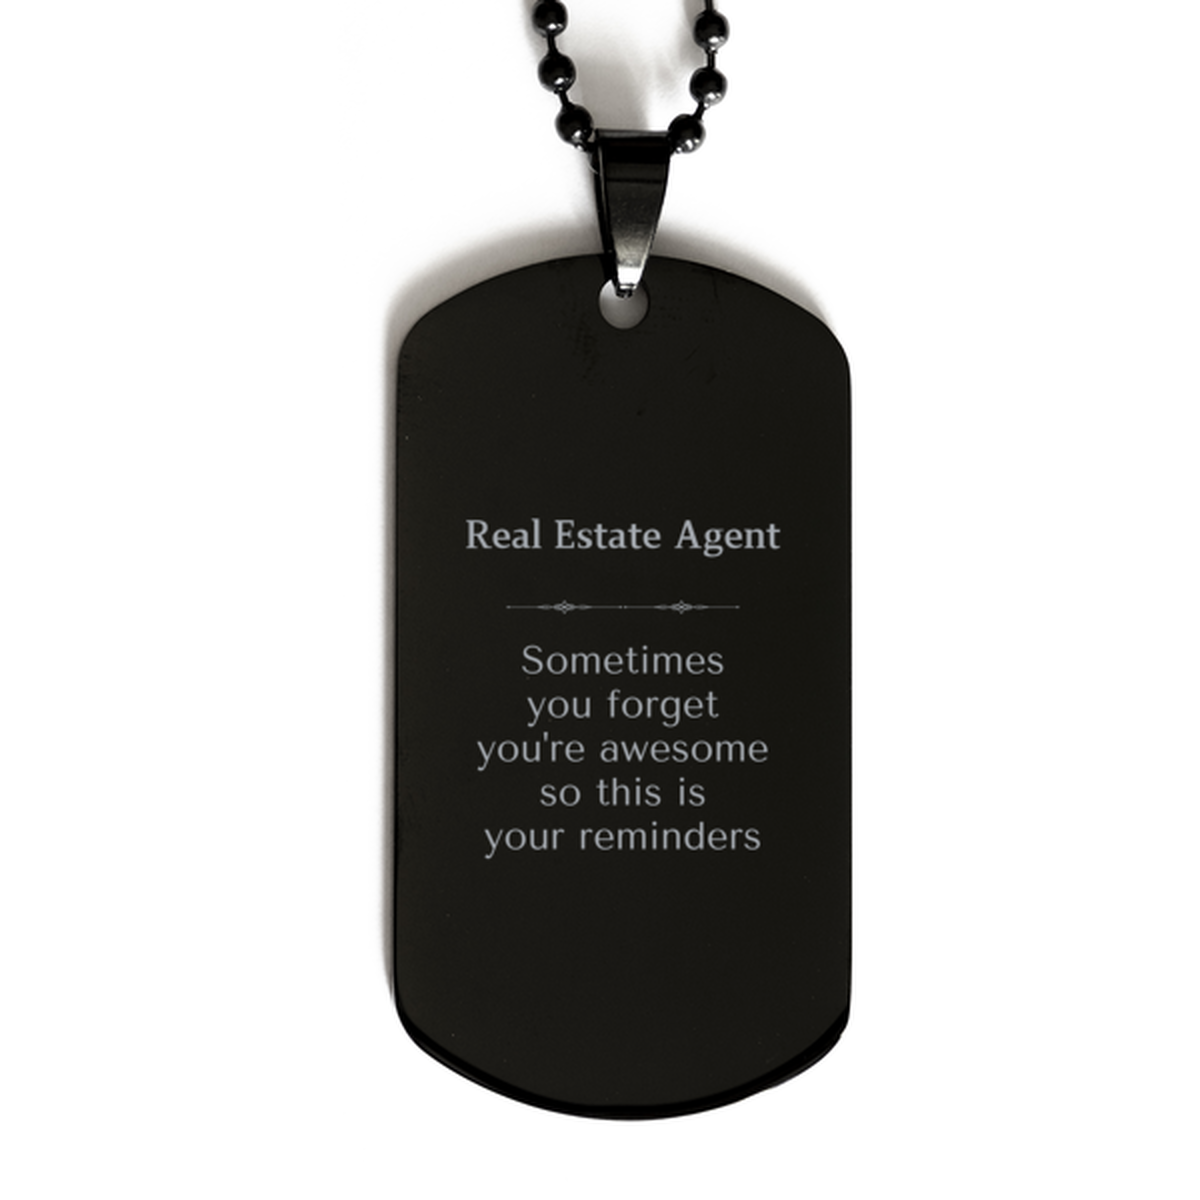 Sentimental Real Estate Agent Black Dog Tag, Real Estate Agent Sometimes you forget you're awesome so this is your reminders, Graduation Christmas Birthday Gifts for Real Estate Agent, Men, Women, Coworkers